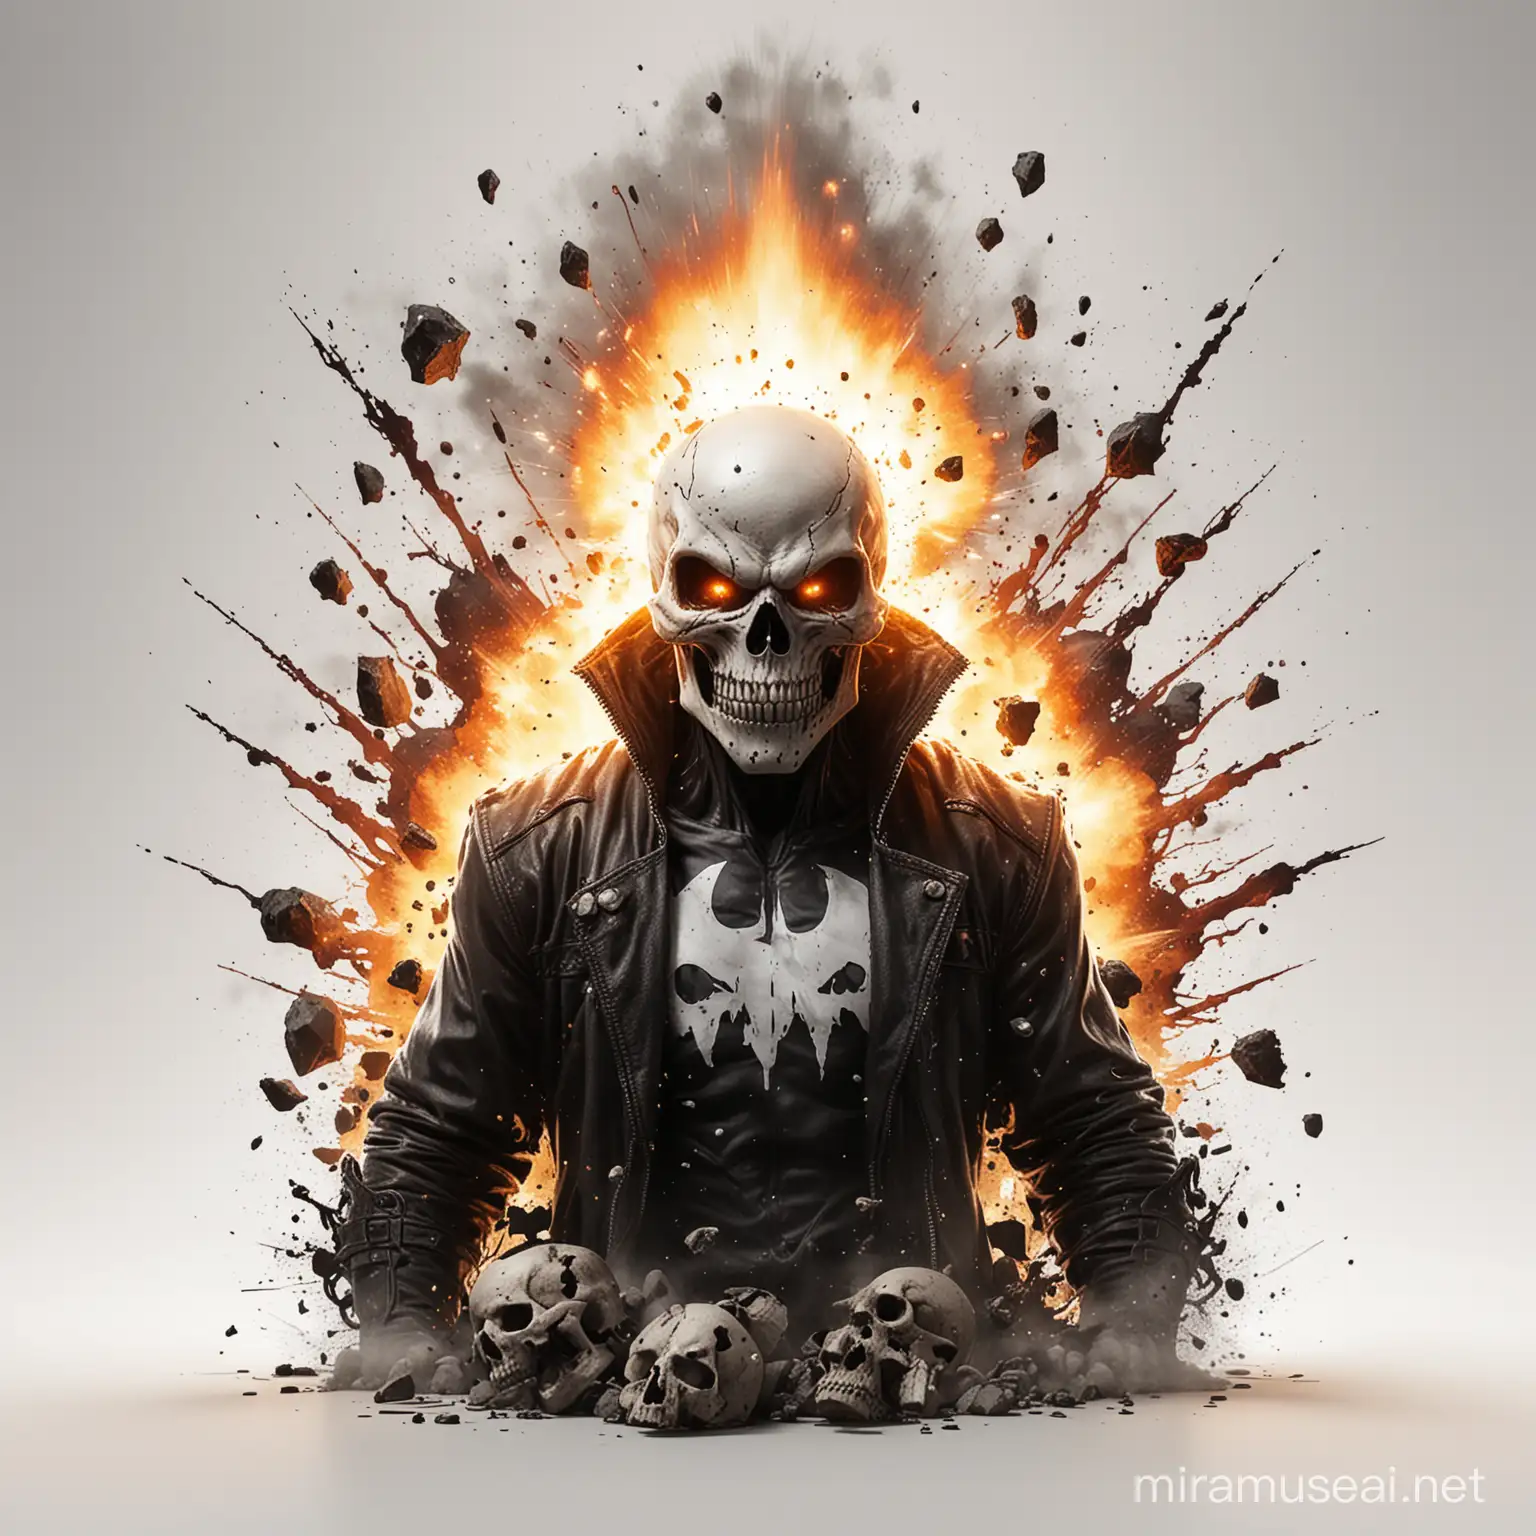 Explosive Skull Character American Comics Style Art Inspired by Greg Capullo and Todd McFarlane